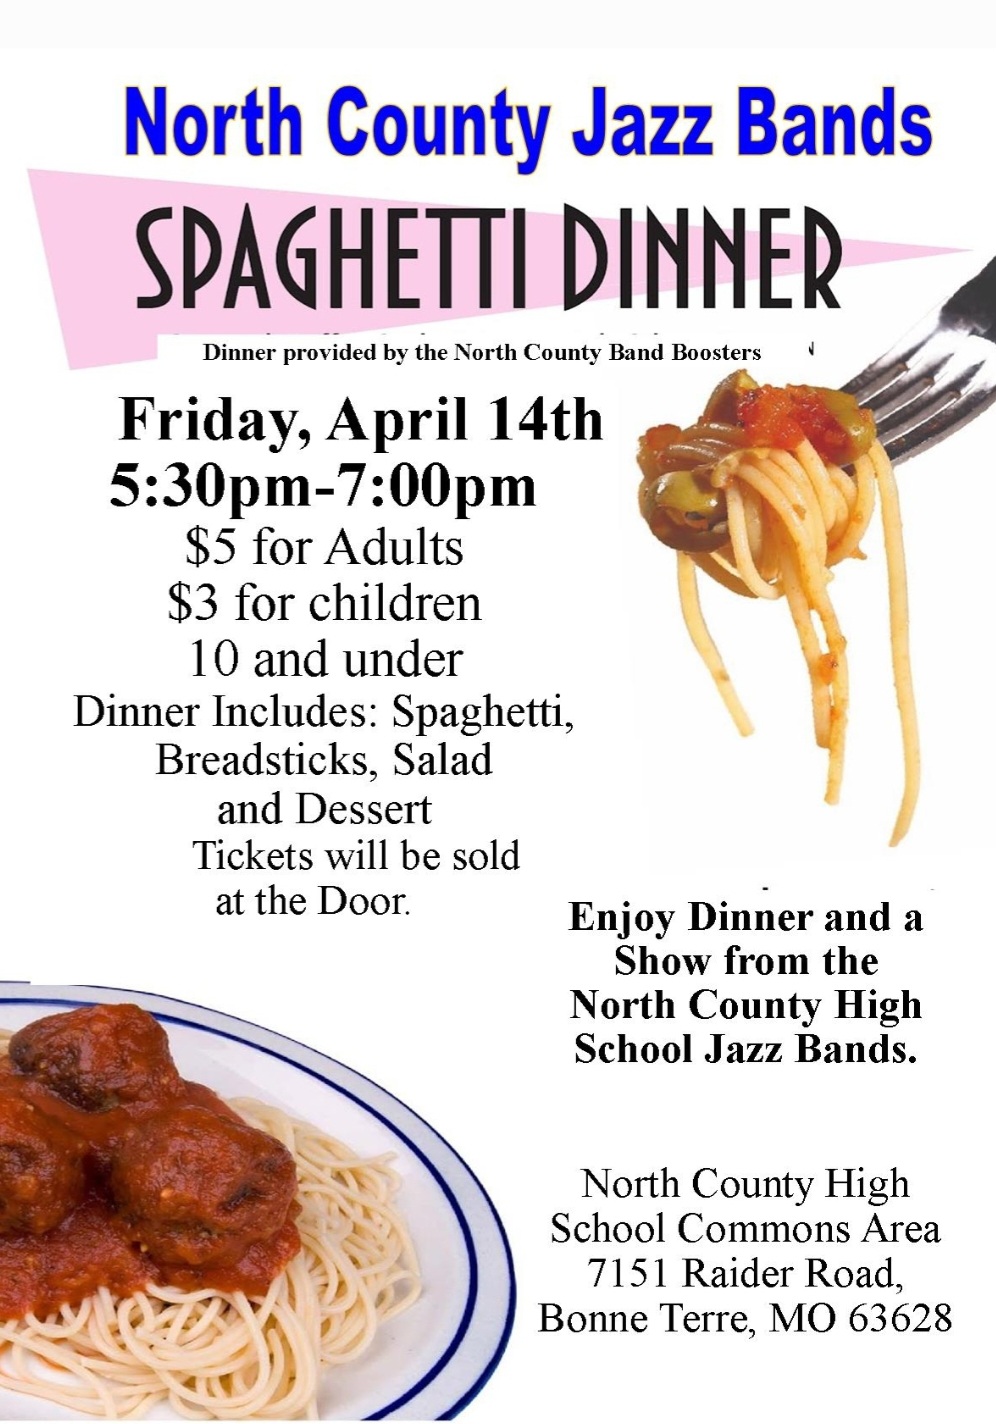 <h1 class="tribe-events-single-event-title">North County Jazz Bands Spaghetti Dinner in Bonne Terre</h1>